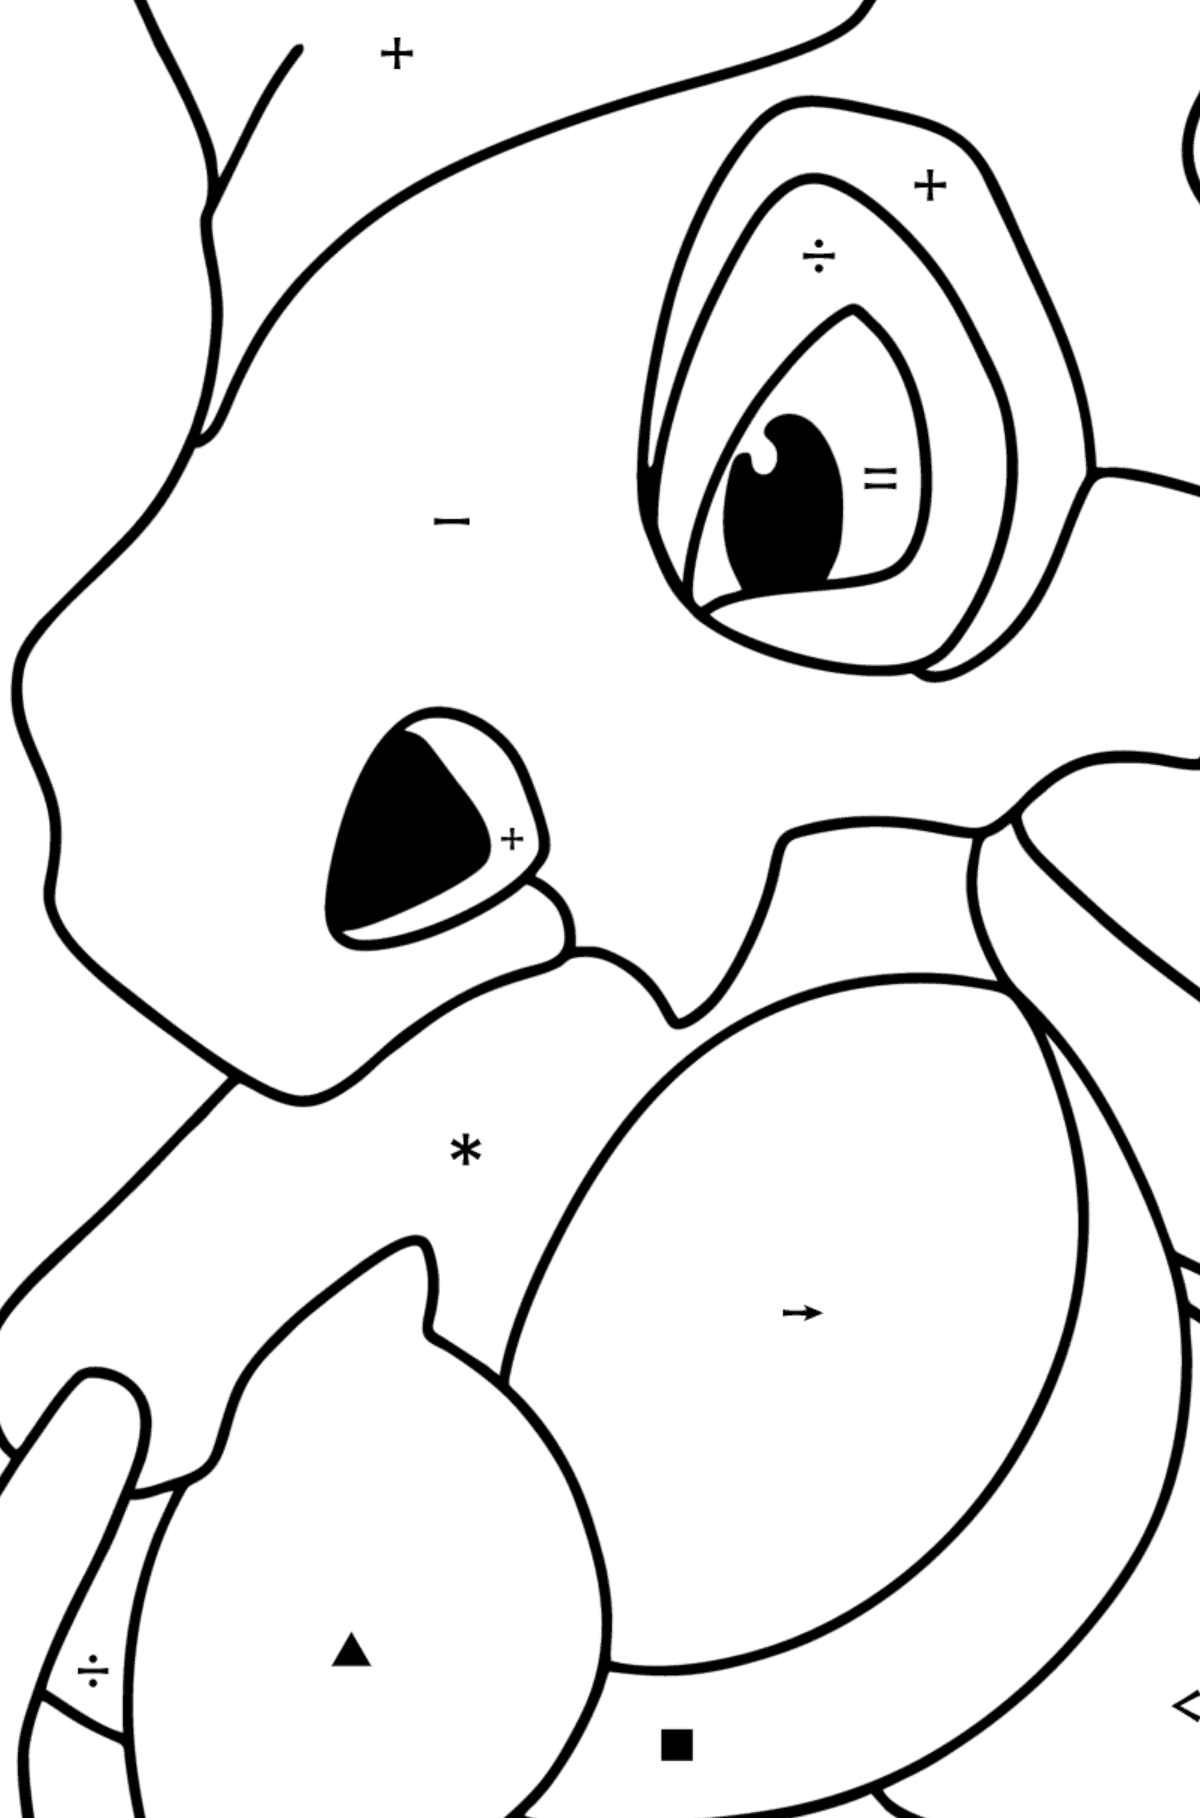 Coloring page Pokemon Go Cubone - Coloring by Symbols for Kids